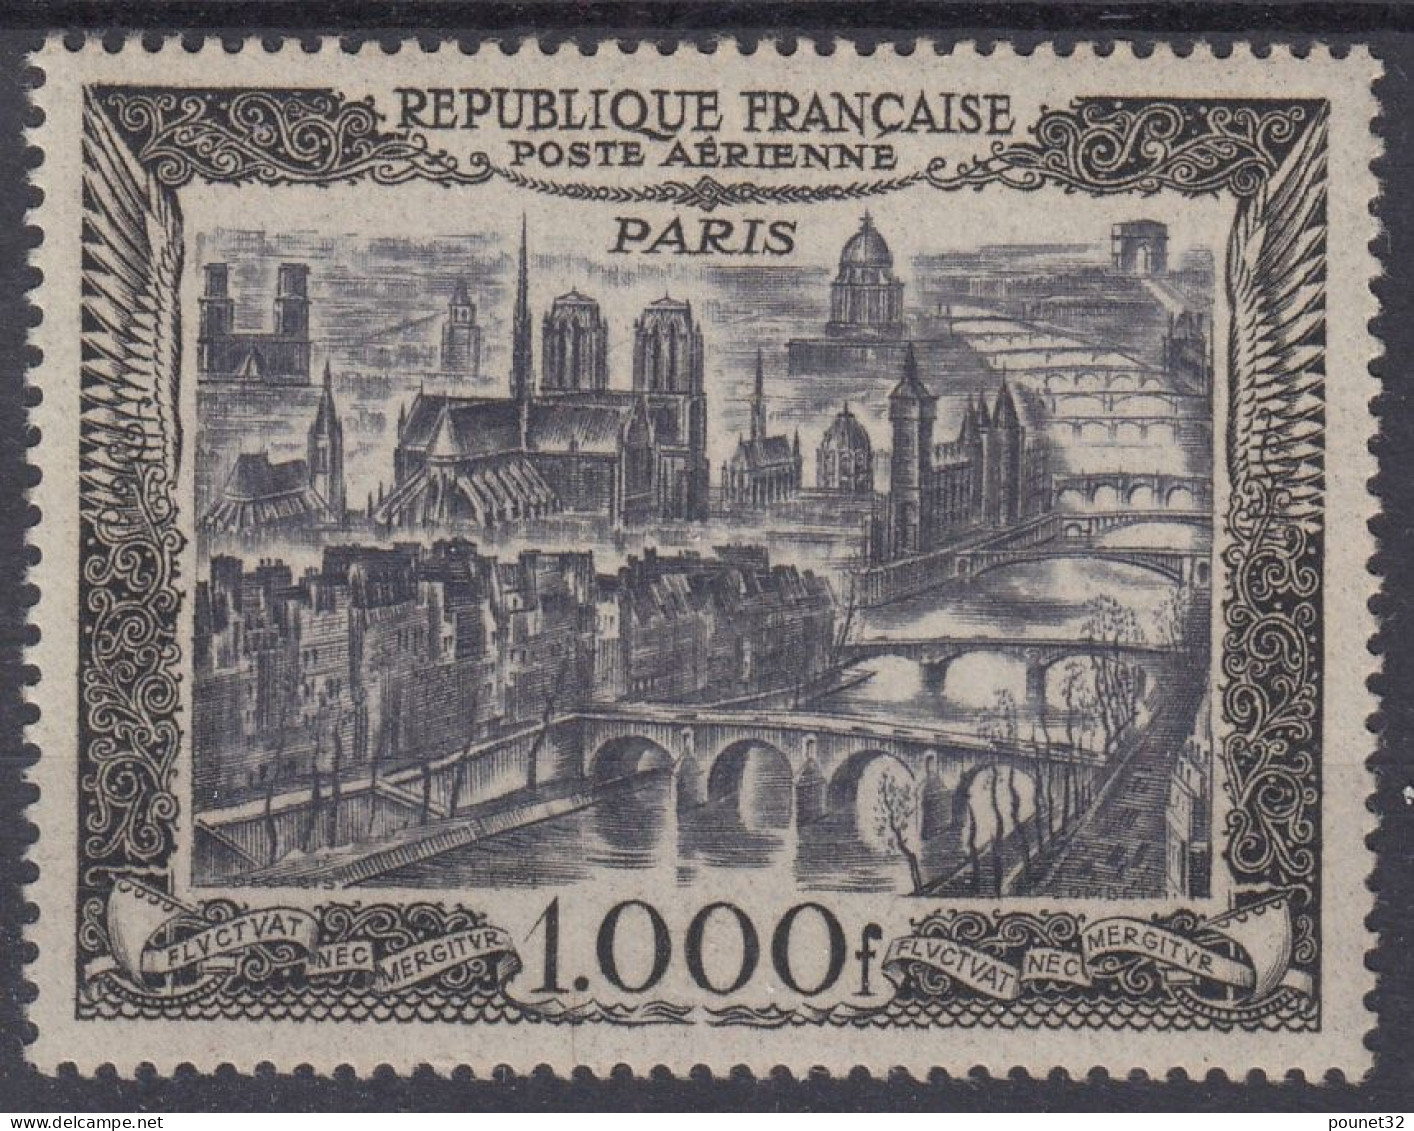 FRANCE POSTE AERIENNE PARIS N° 29 NEUF GOMME SANS CHARNIERE ( LEGERE ADHERENCE ) - 1927-1959 Nuovi